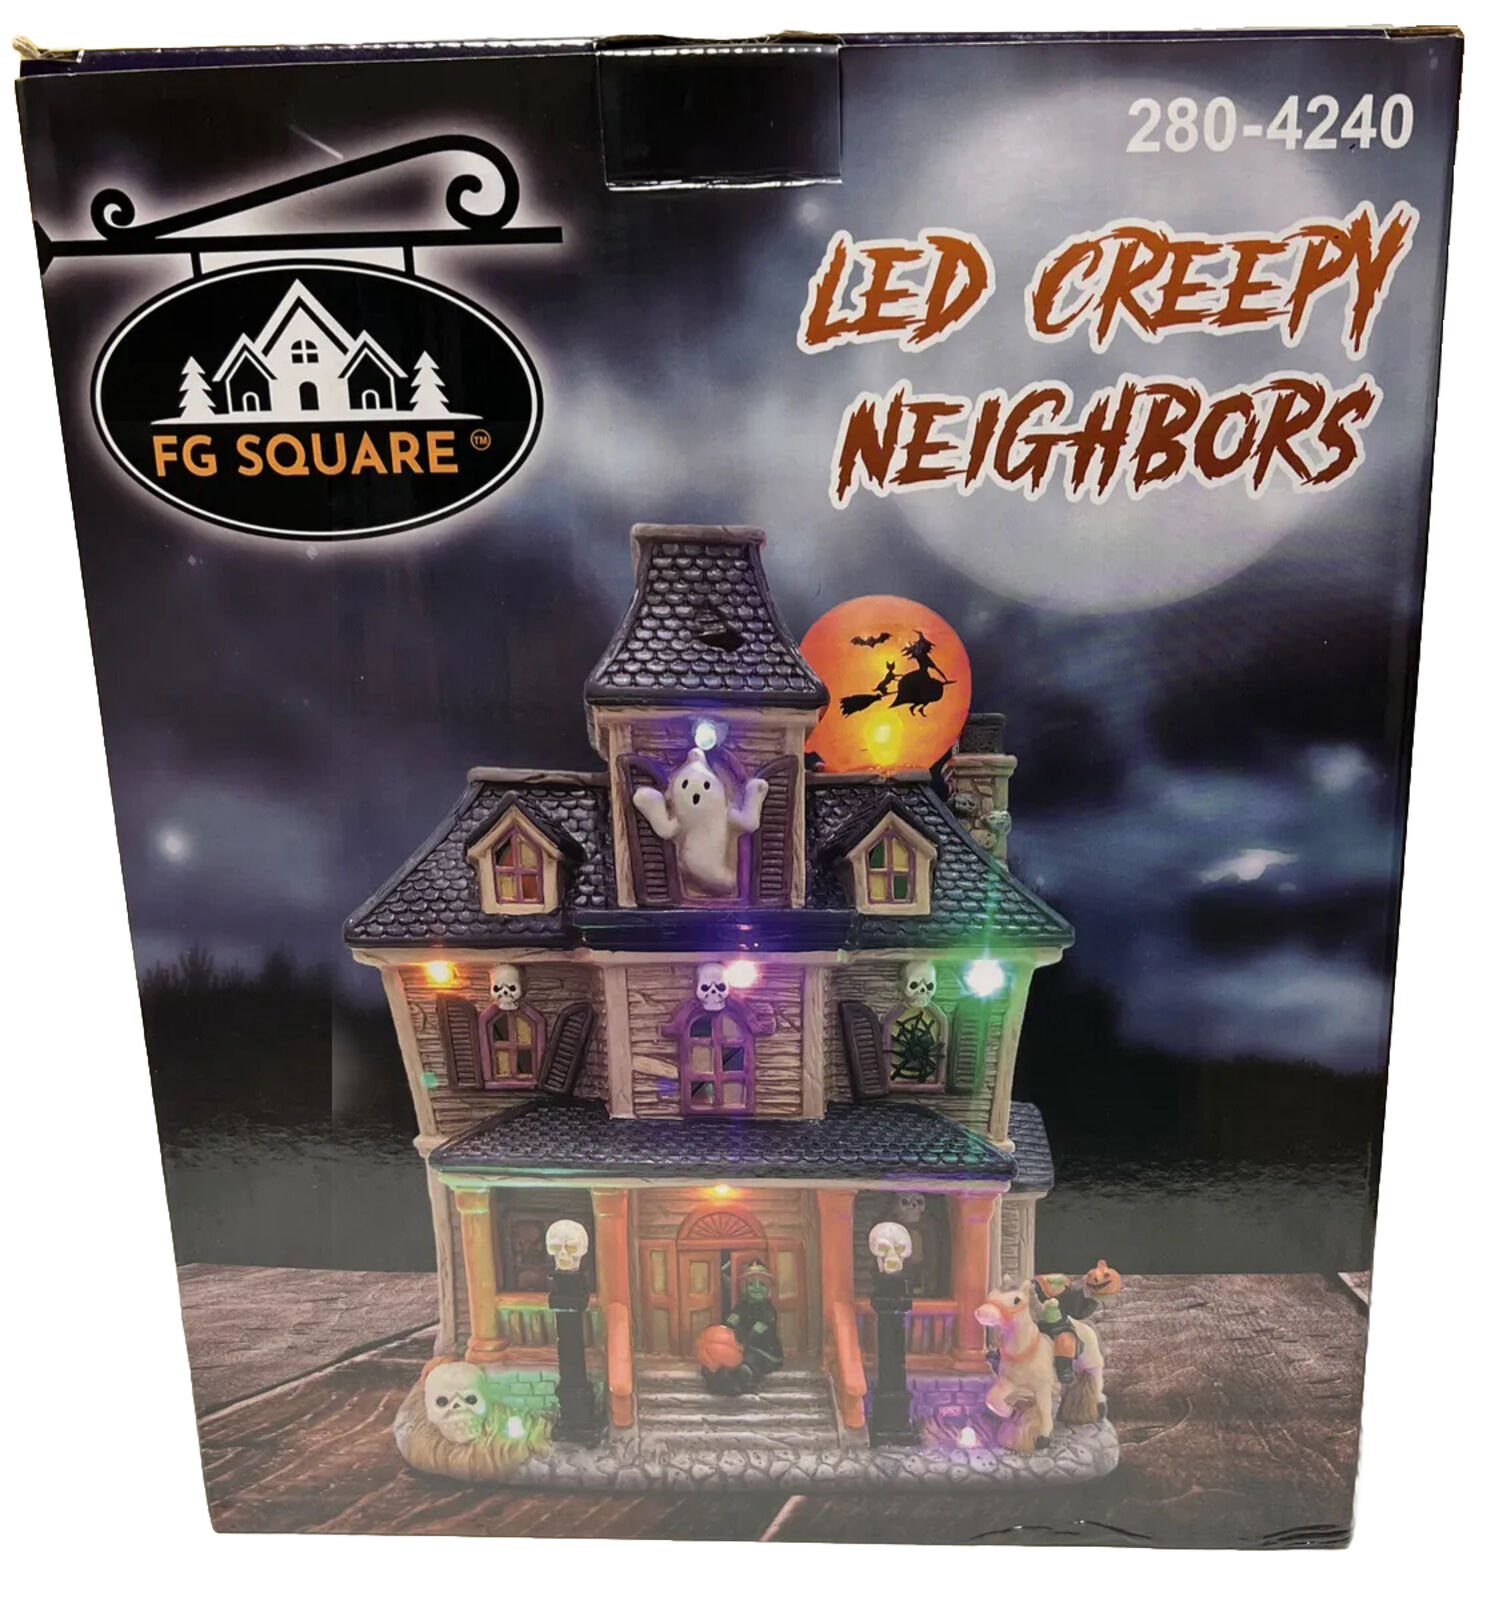 FG Square Halloween “Creepy Neighbors” 280-4240 LED hand painted sound effects